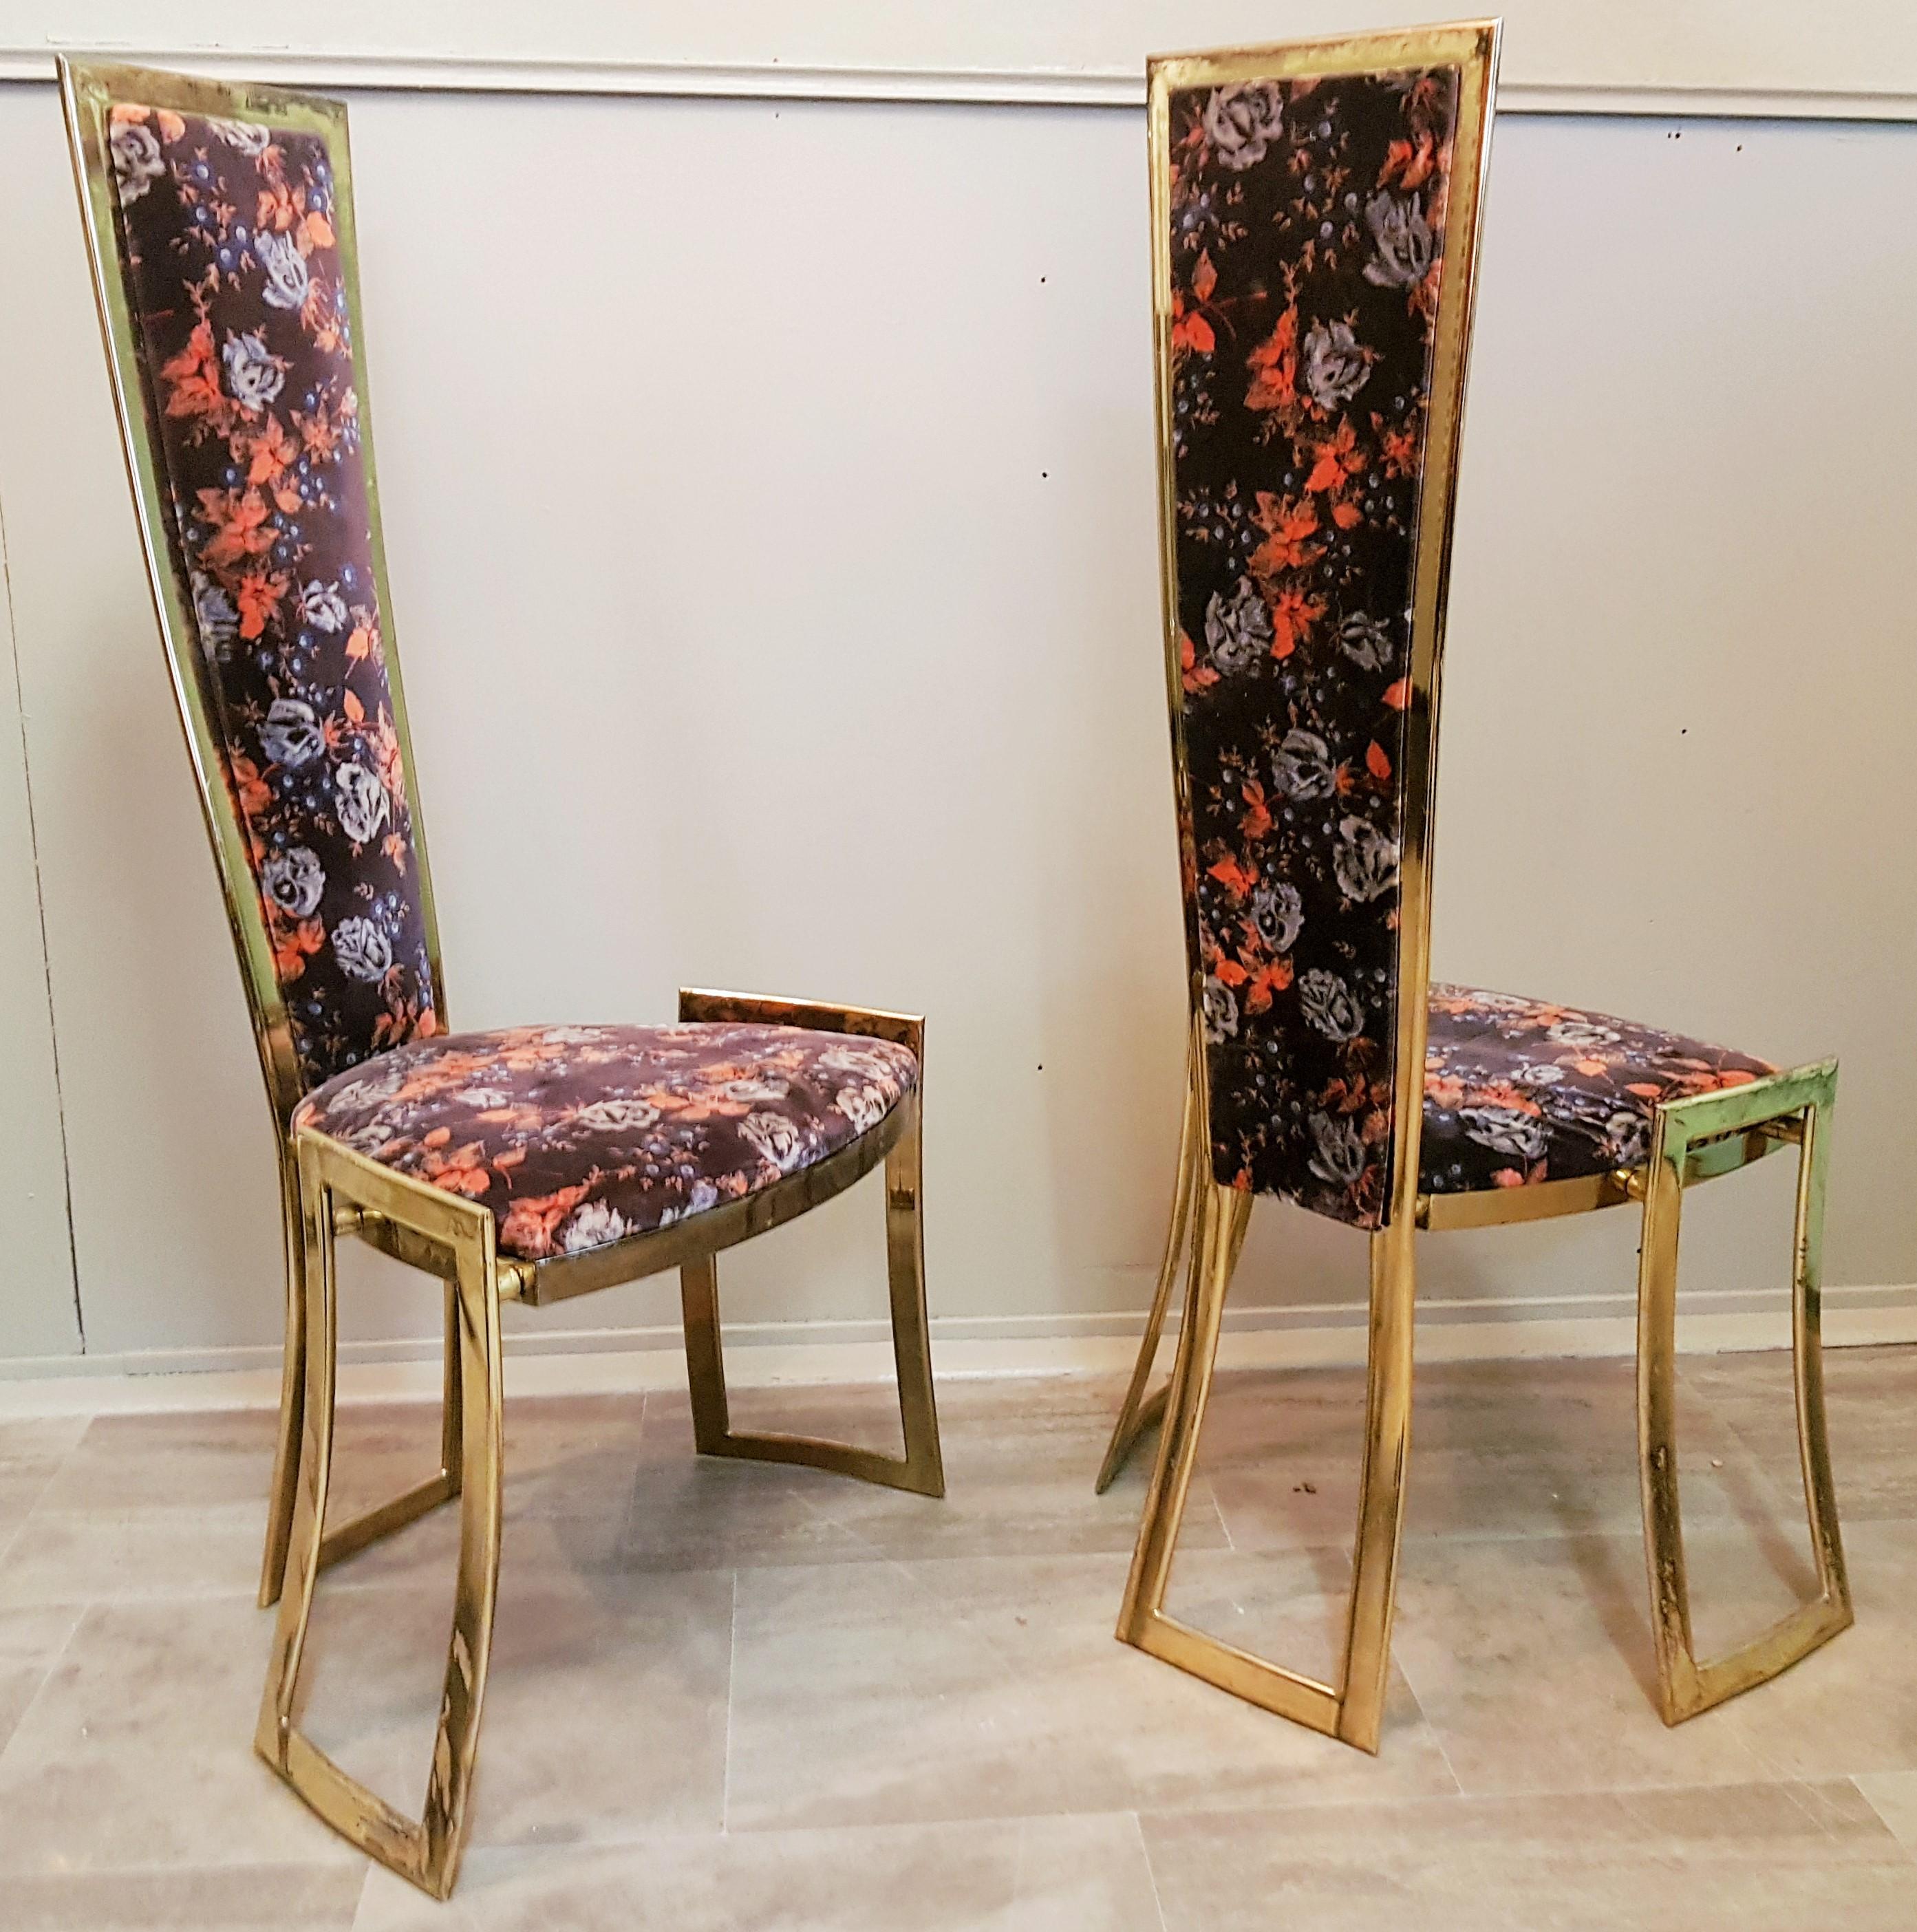 Midcentury High Back Brass Chairs Style Rizzo Hollywood Regency, France 1960s For Sale 5